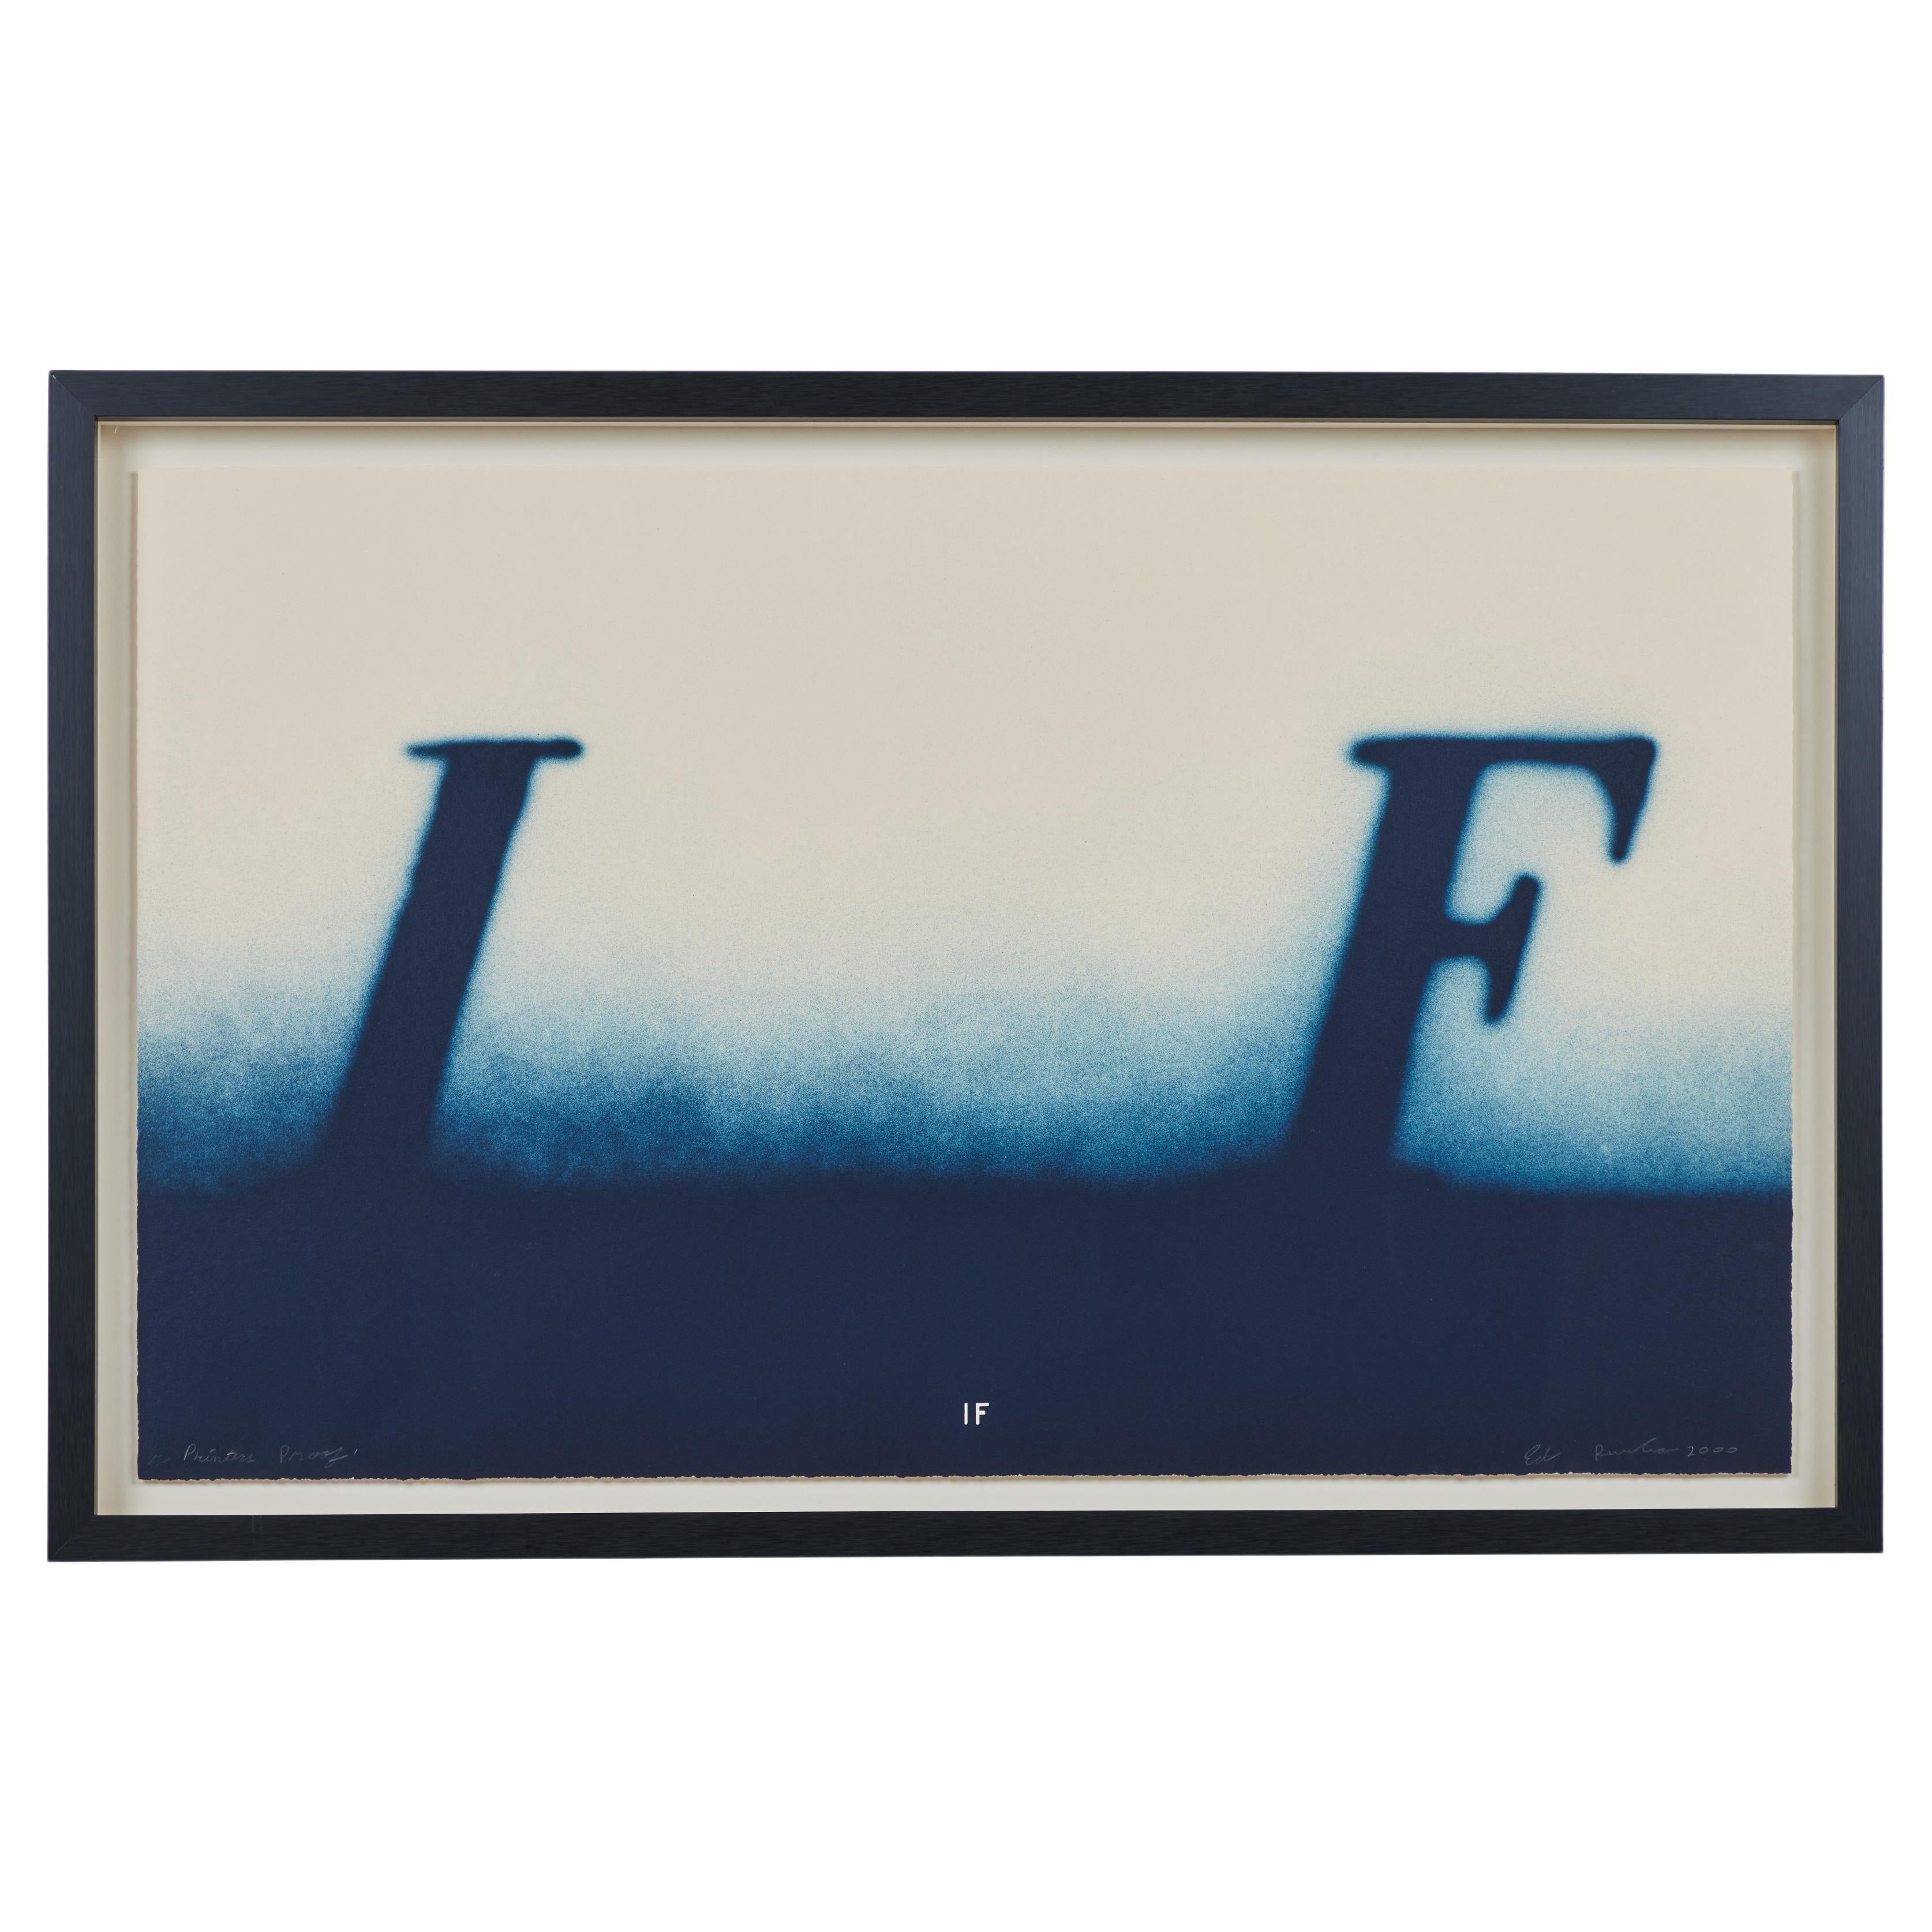 "IF" Lithograph by Ed Ruscha